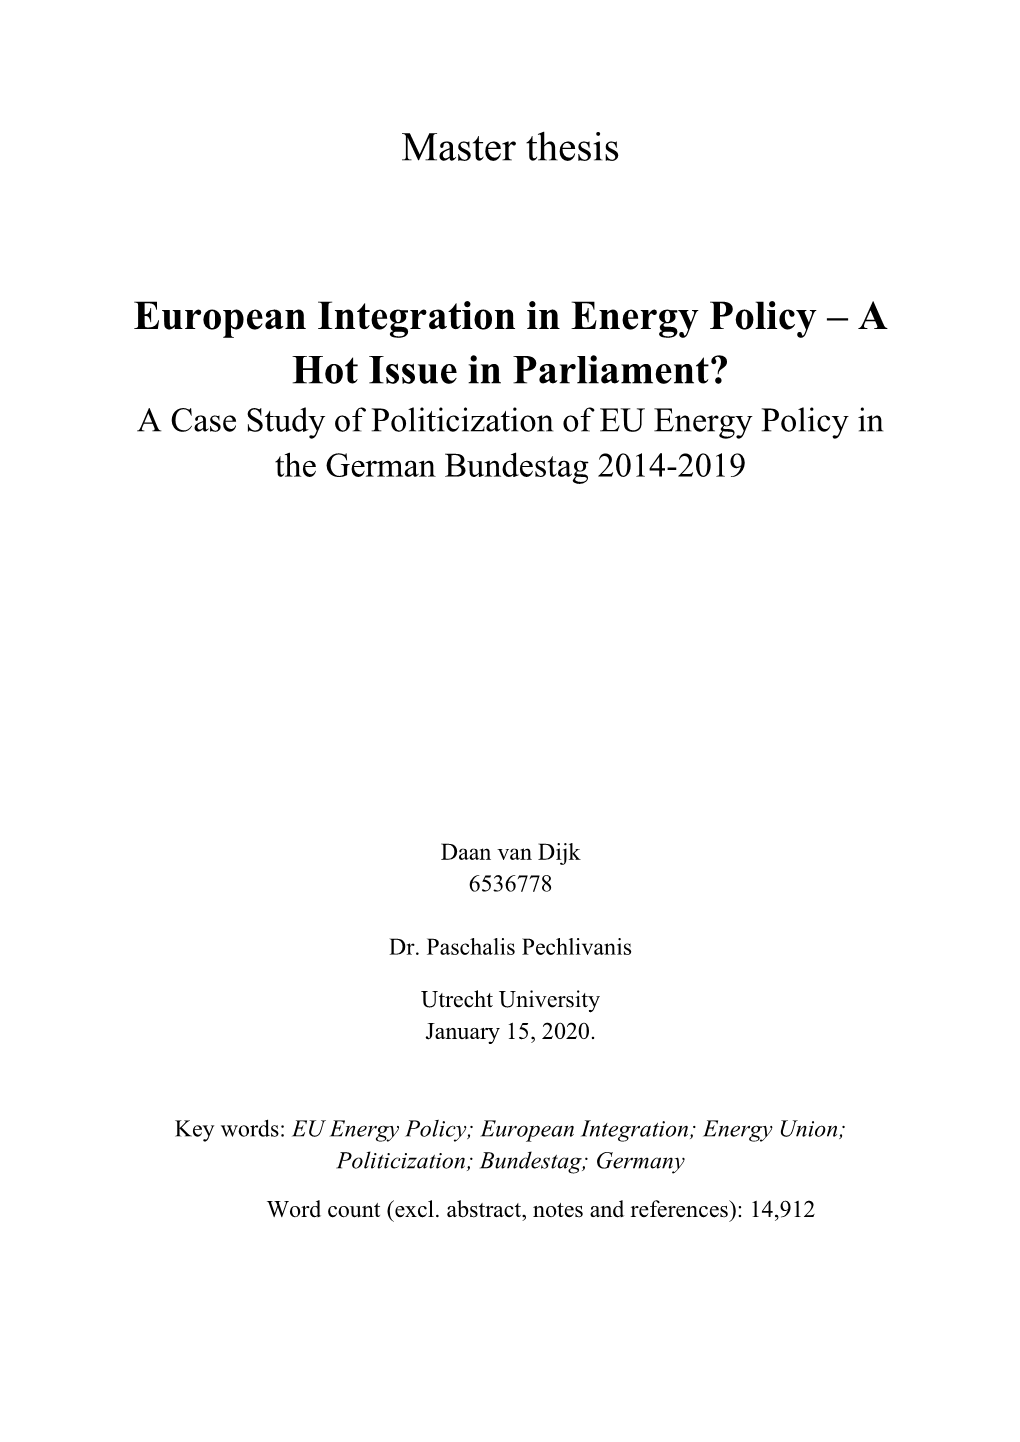 Master Thesis European Integration in Energy Policy – a Hot Issue In